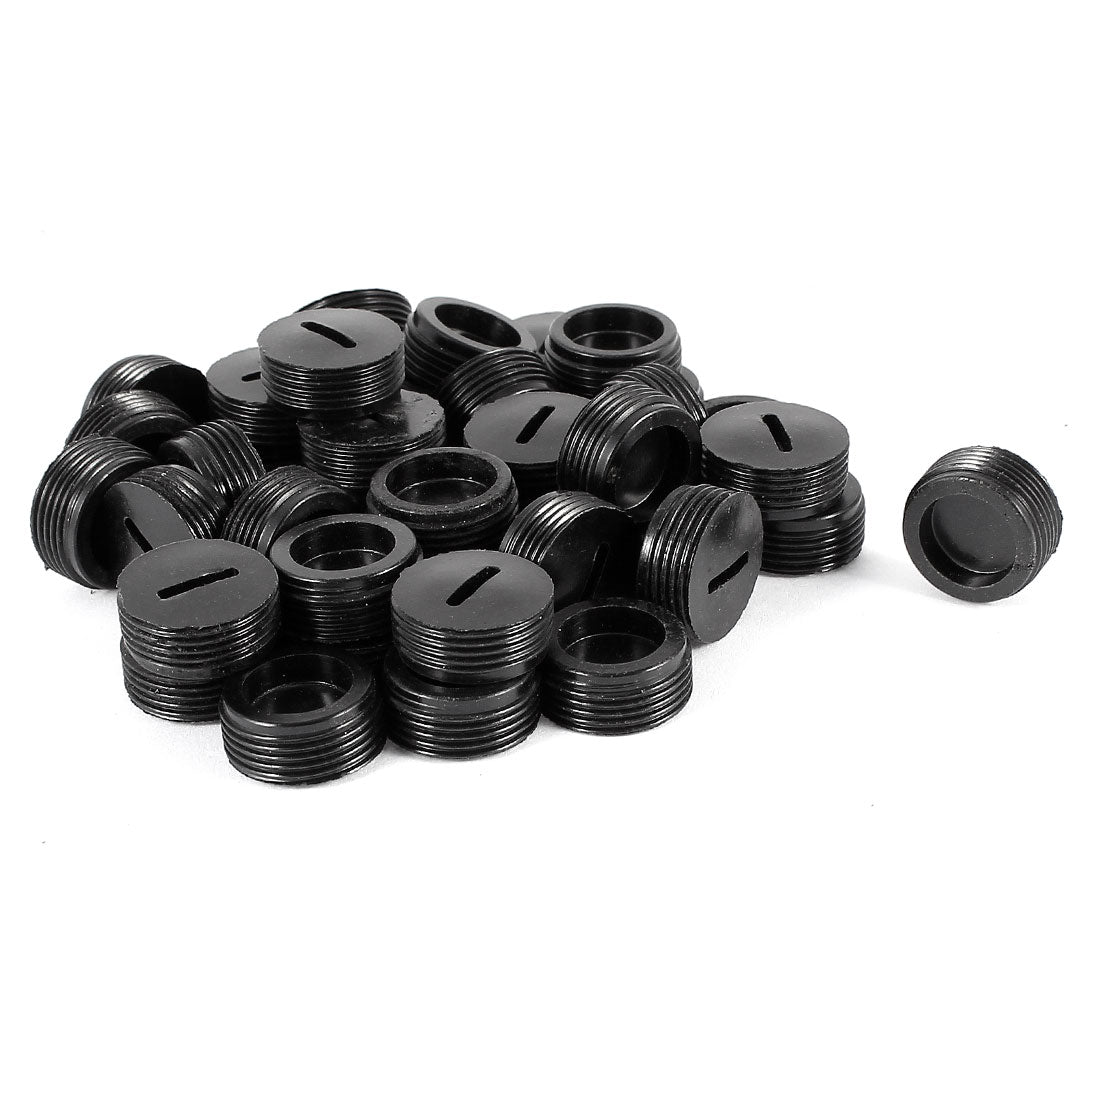 uxcell Uxcell 40 Pcs 7mm High 15.3mm Dia External Thread Round Black Plastic Motor Carbon Brush Holder Cap Cover